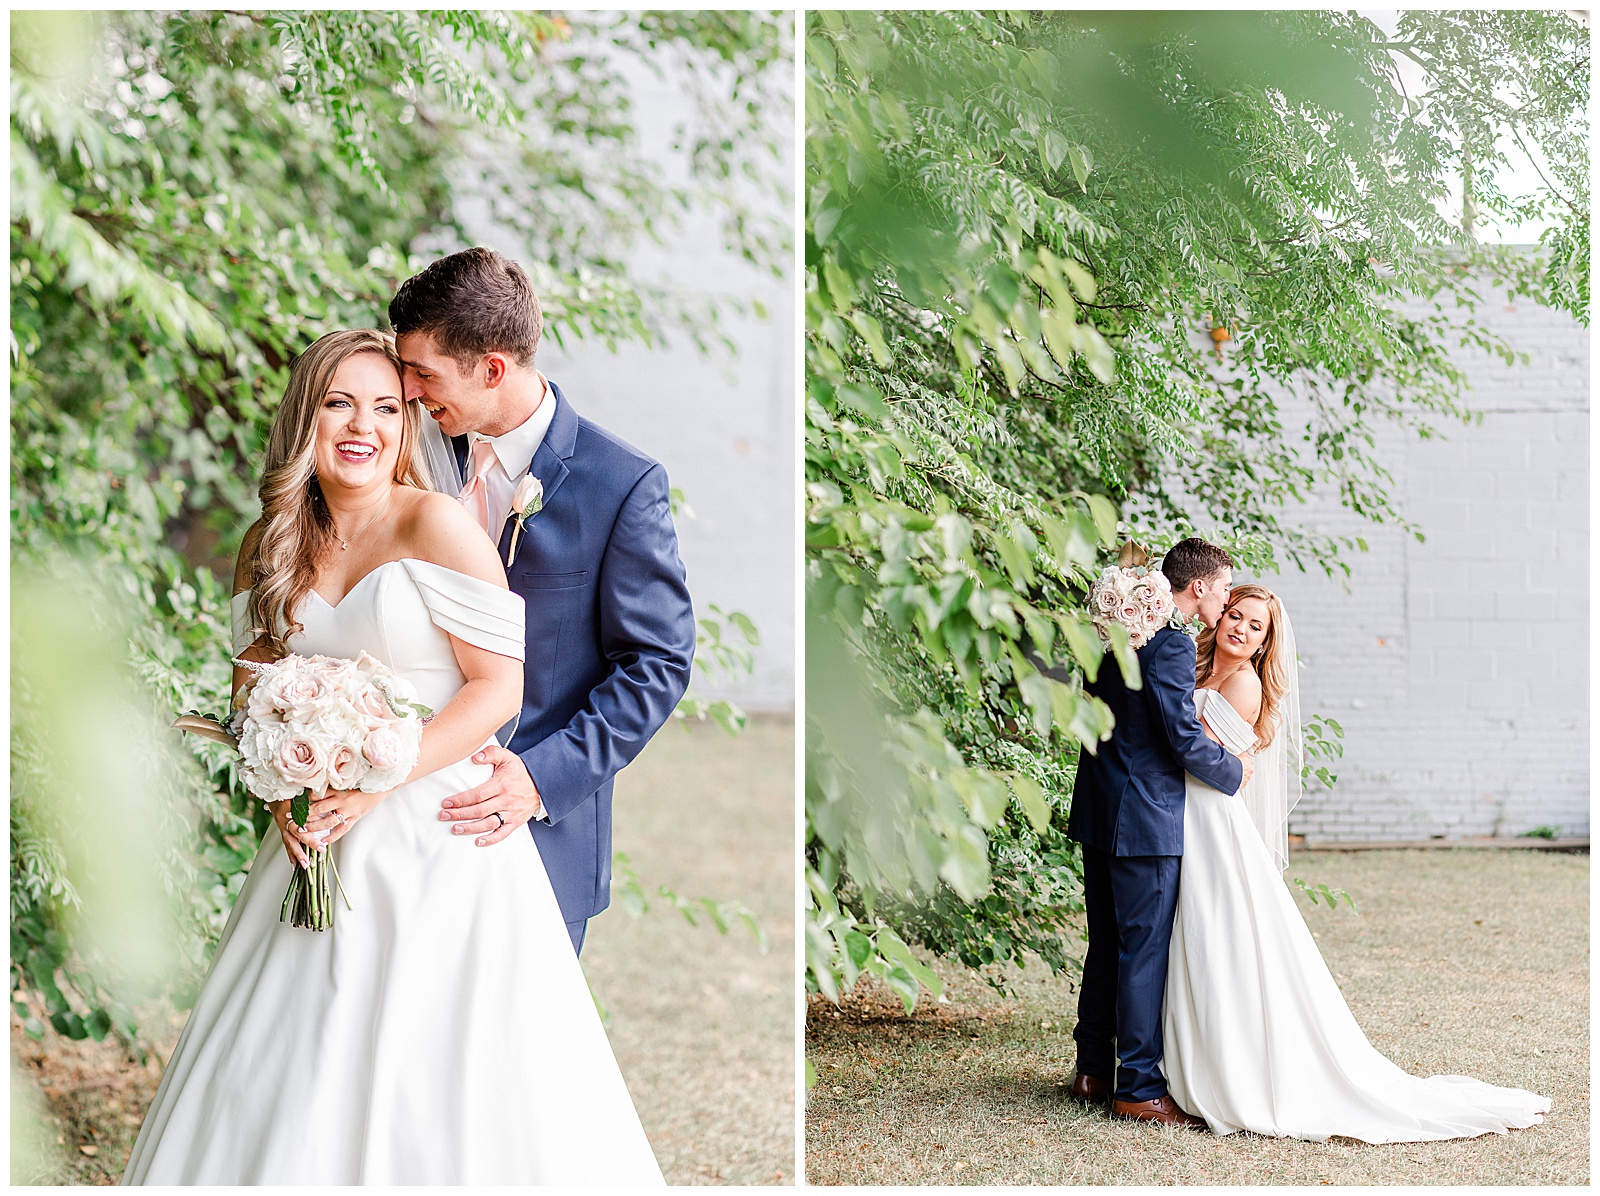 Stunning Bride and Groom with off shoulder wedding dress and blue suit in outdoor portraits in front of white grungy wall from Summer Wedding in Charlotte, NC | Check out the full wedding at KevynDixonPhoto.com